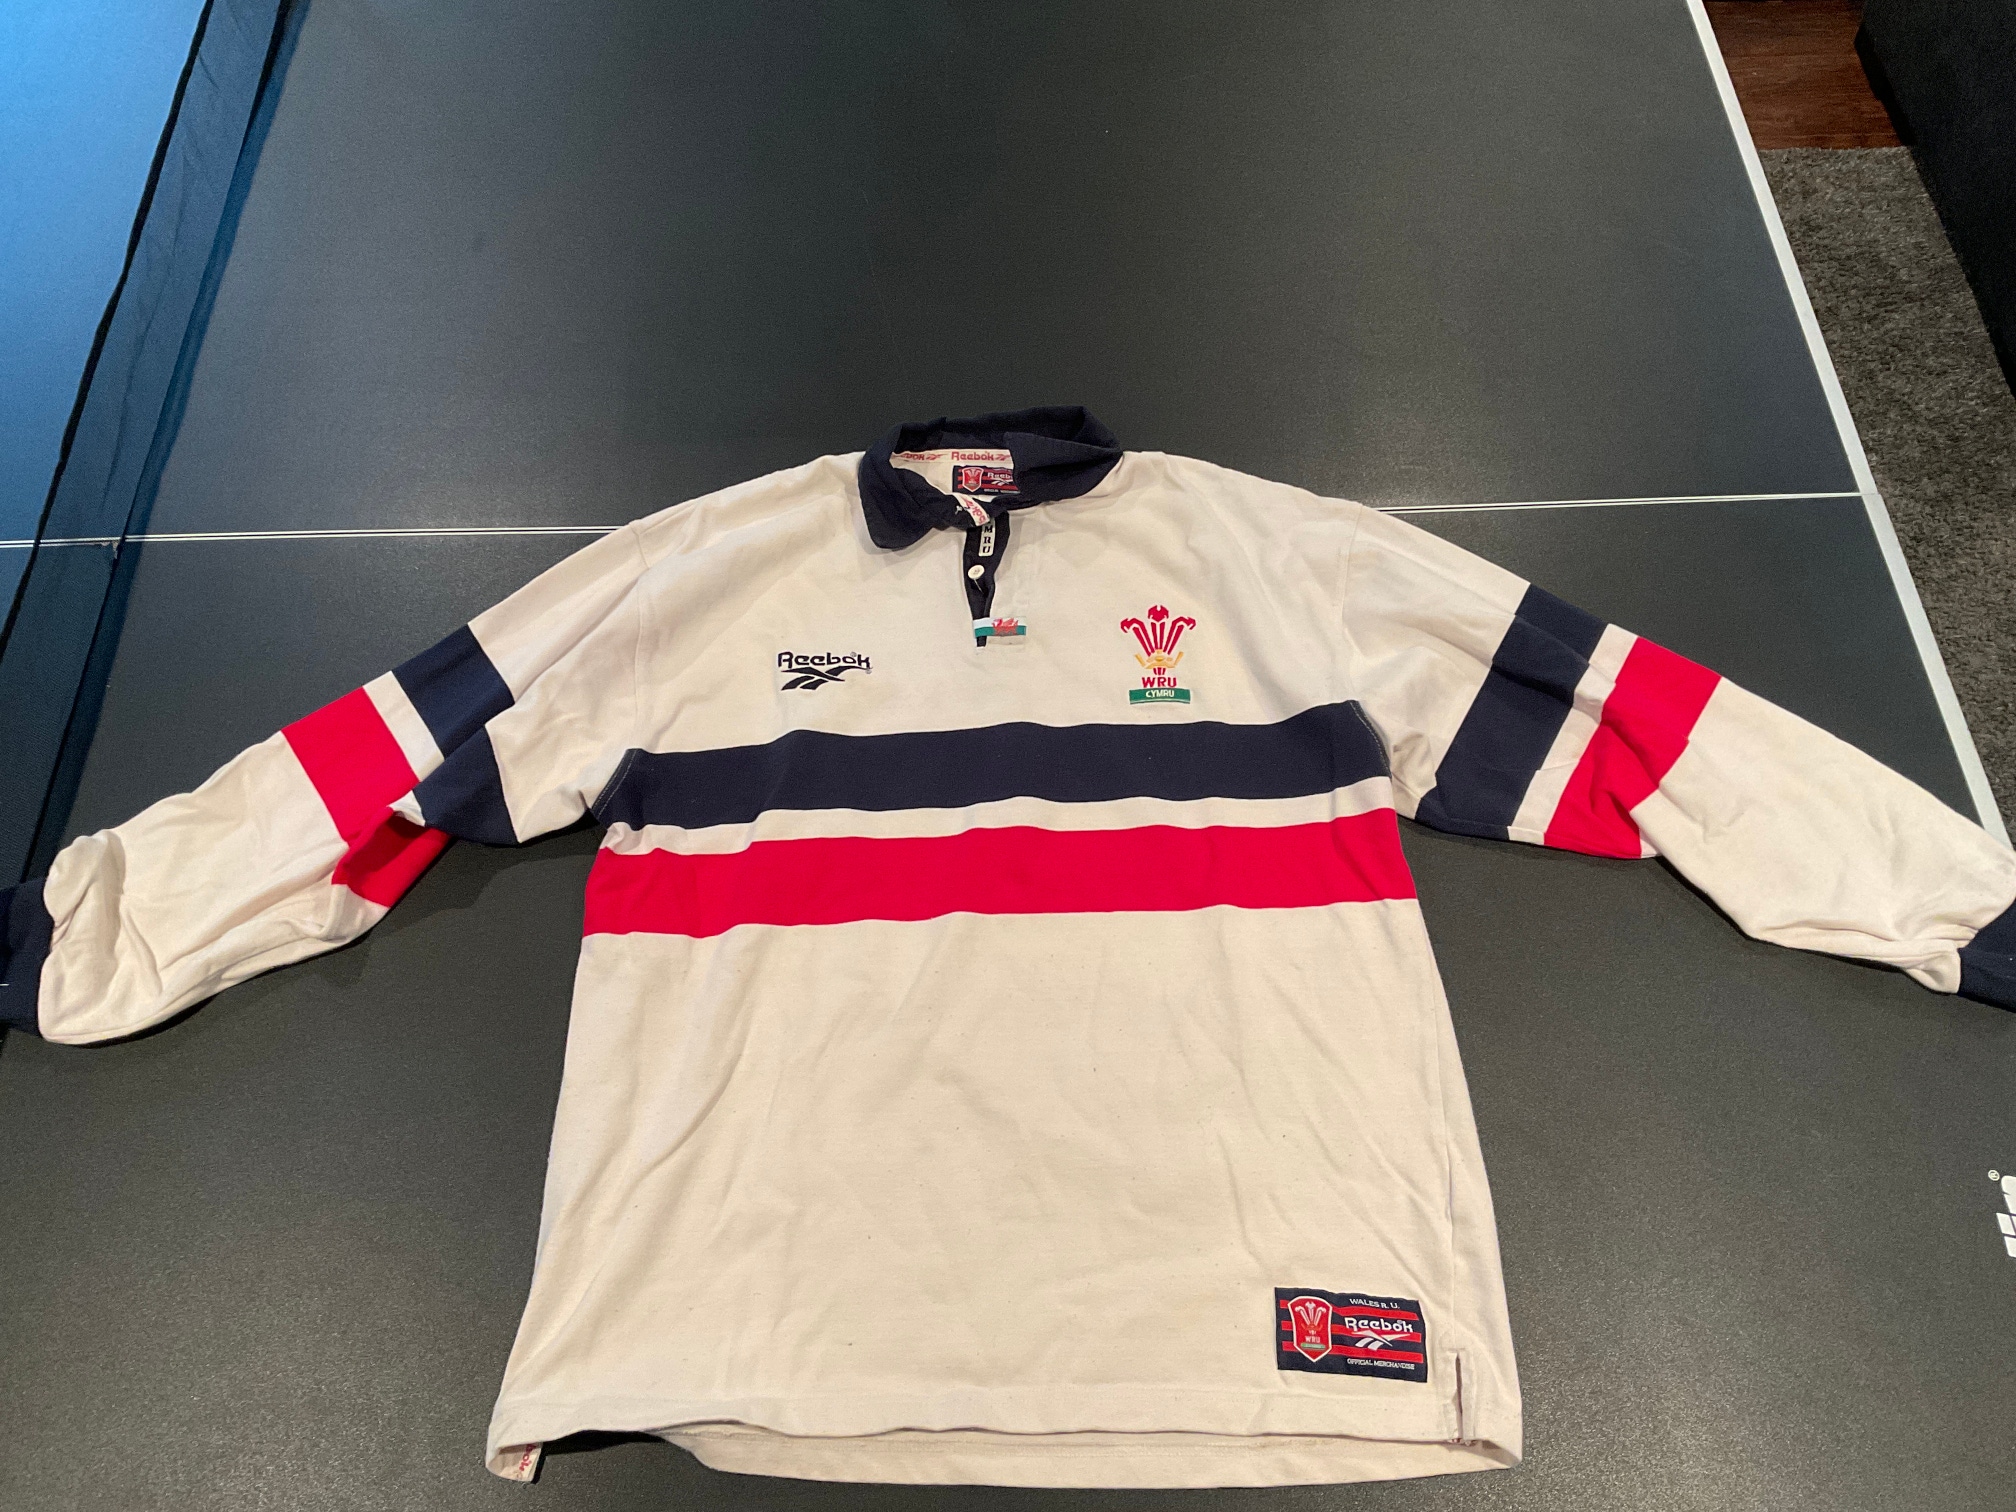 RUGBY Jersey - White Used Size 46 / 48 Reebok Jersey. Comparable to men’s XL